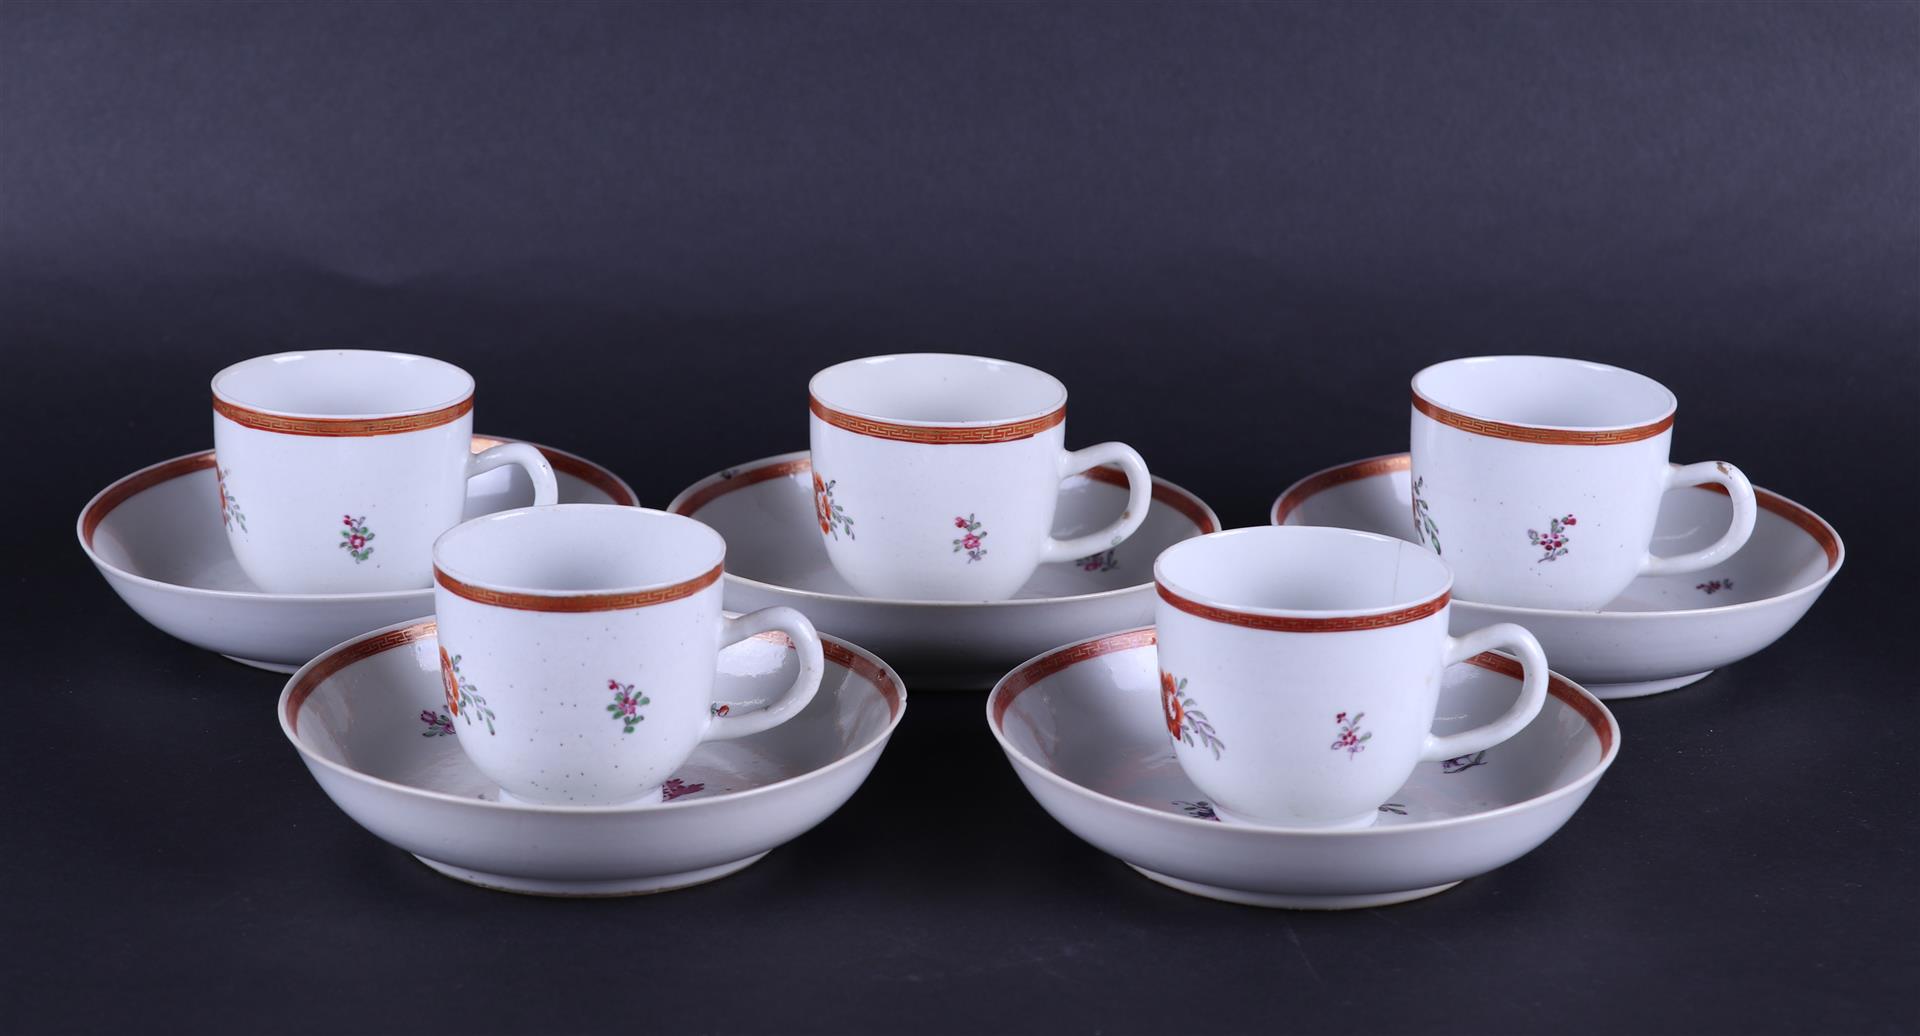 A set of  (5) porcelain Famile Rose cups and saucers. China, 18th century.